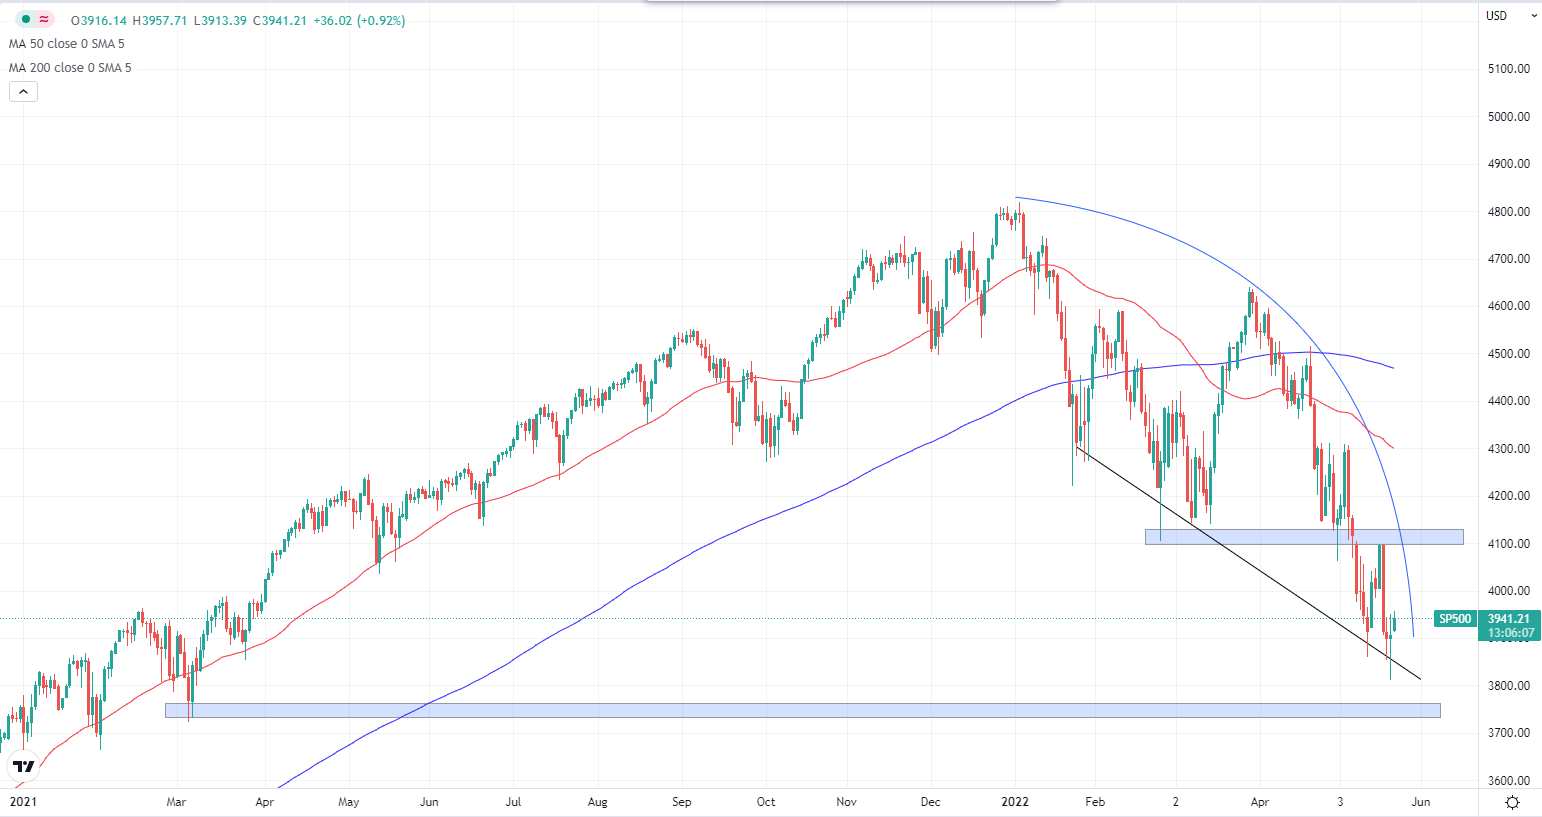 sp500-daily-chart